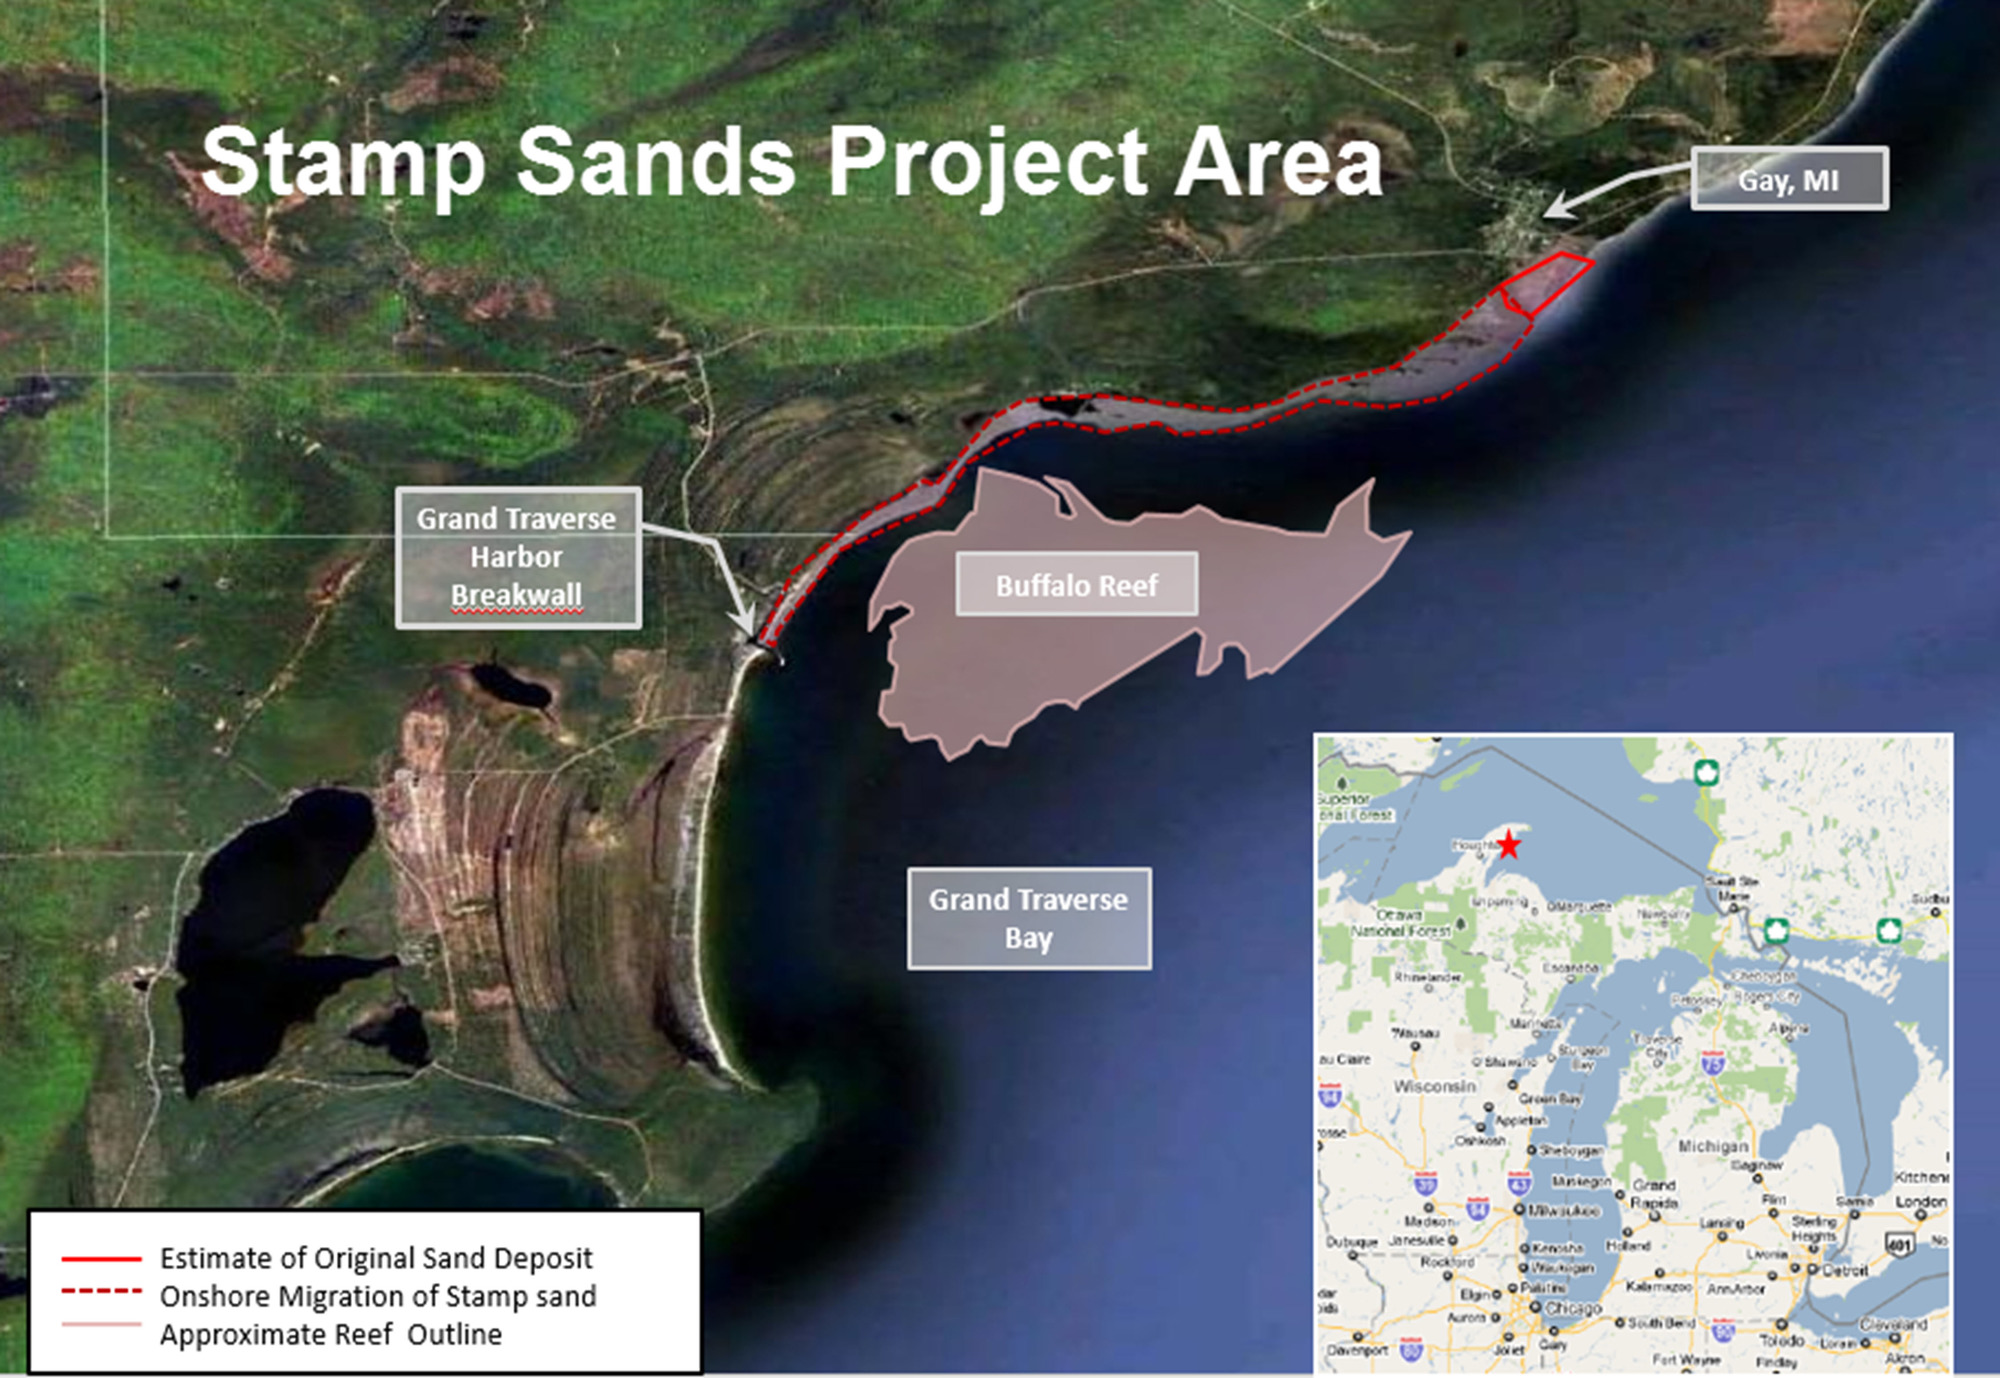 A map shows the stamp sands project area on the Keweenaw Peninsula.